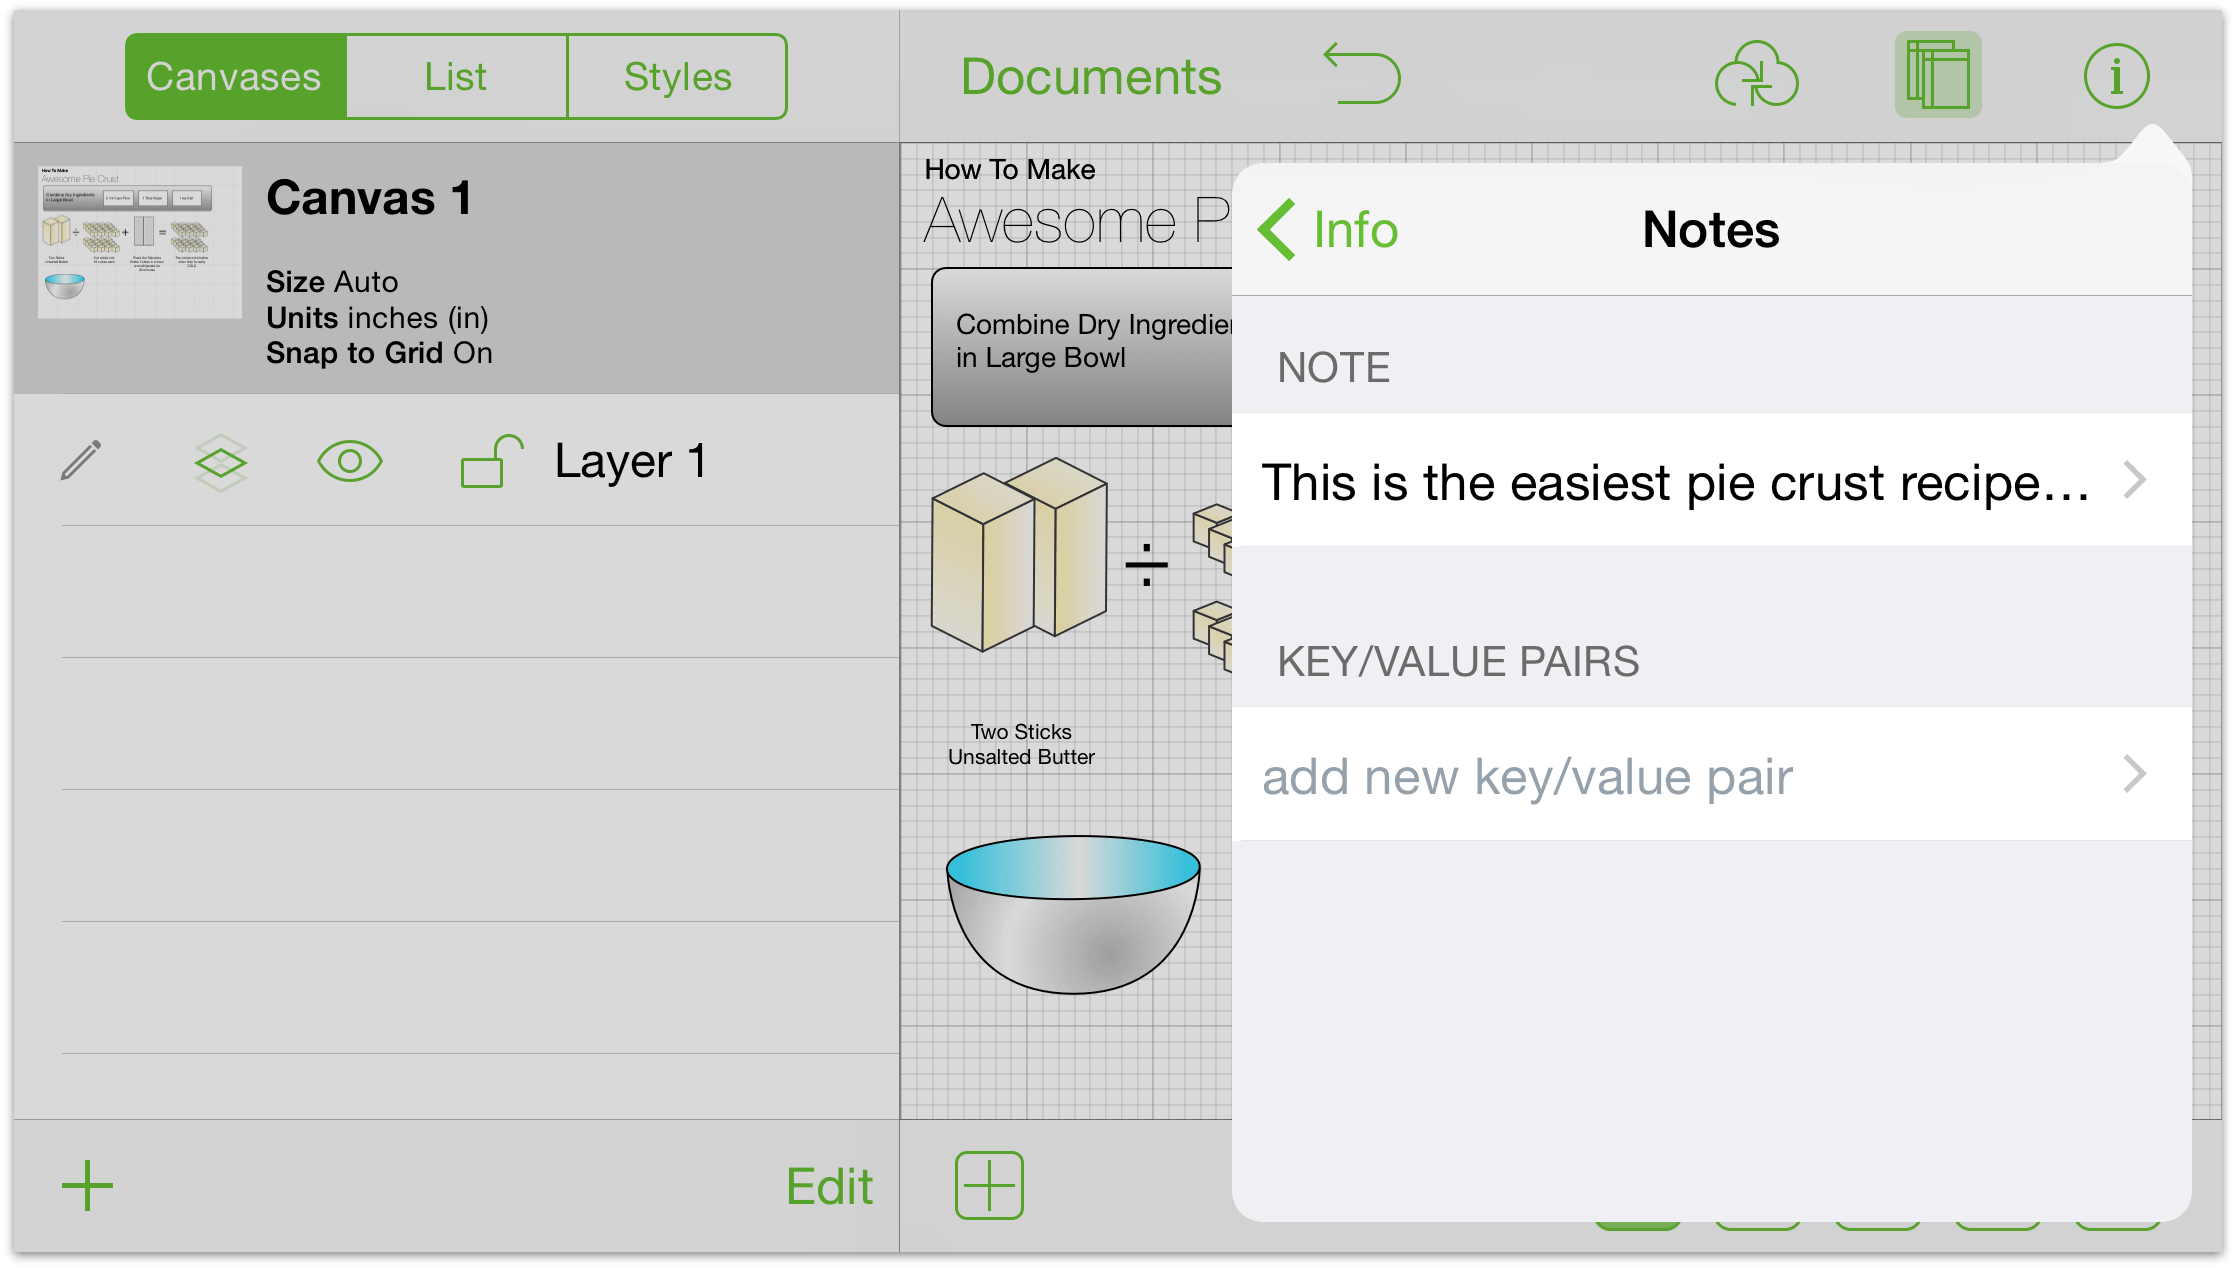 The Notes inspector